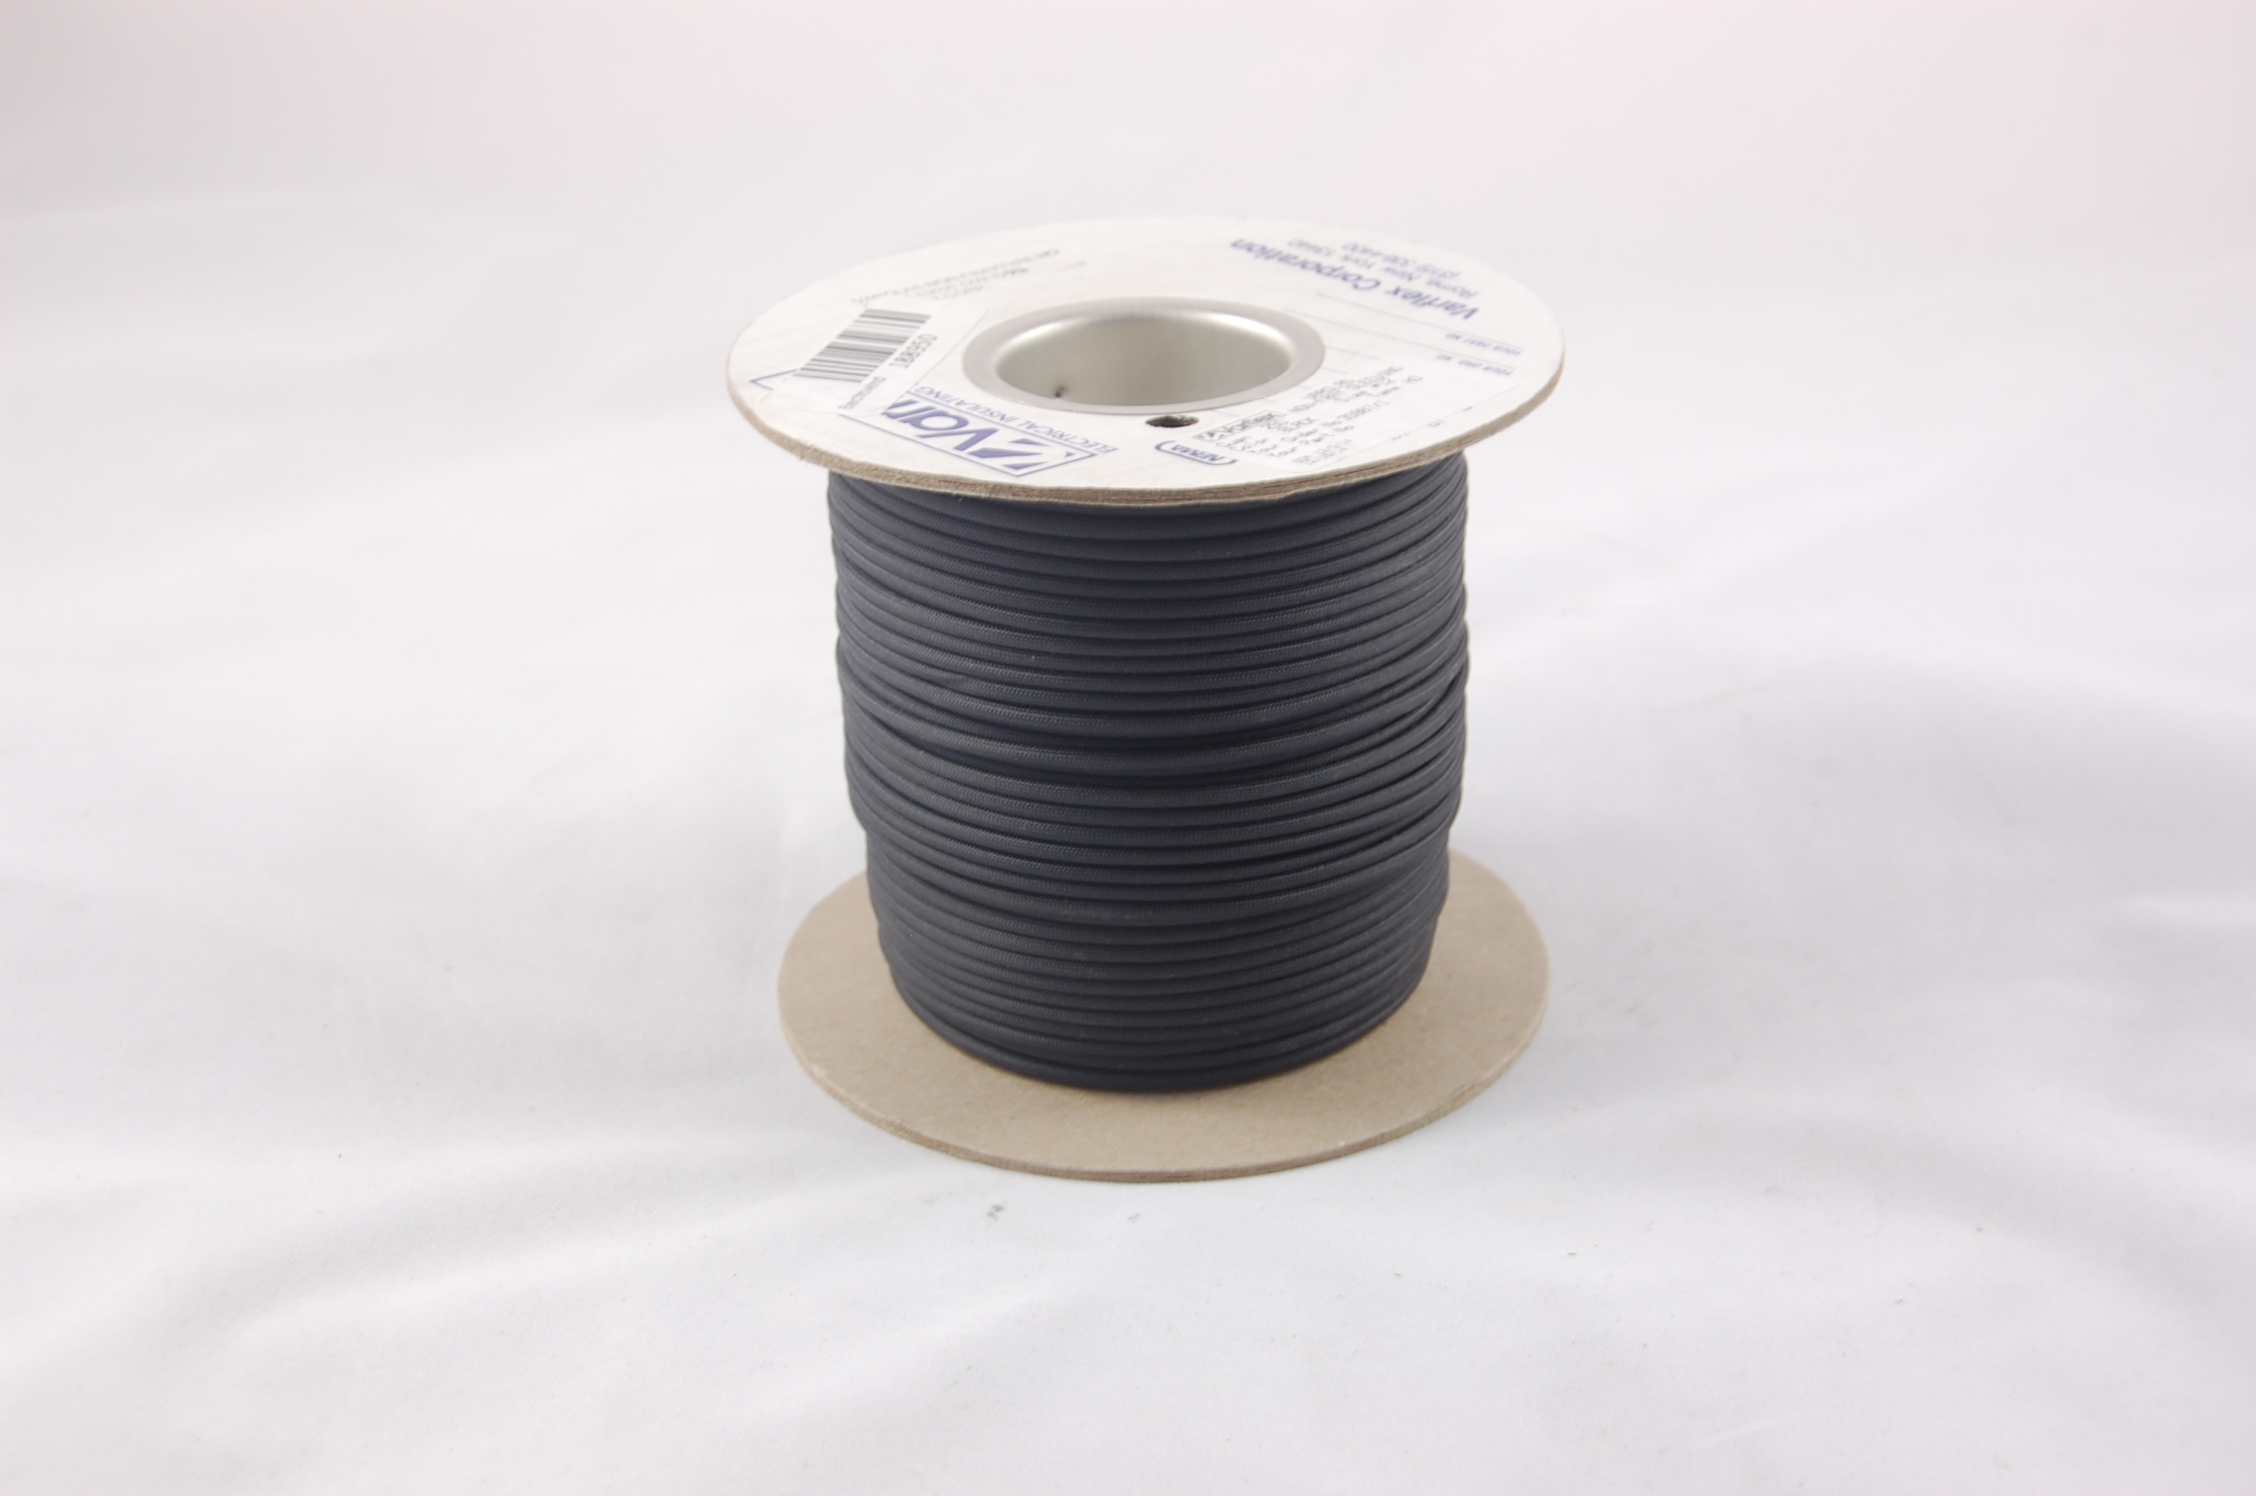 #8 AWG Varglas Type HO Heat-Cleaned and Treated High Temperature Non-Fray Flexible Fiberglass Sleeving , black, 250 FT per spool